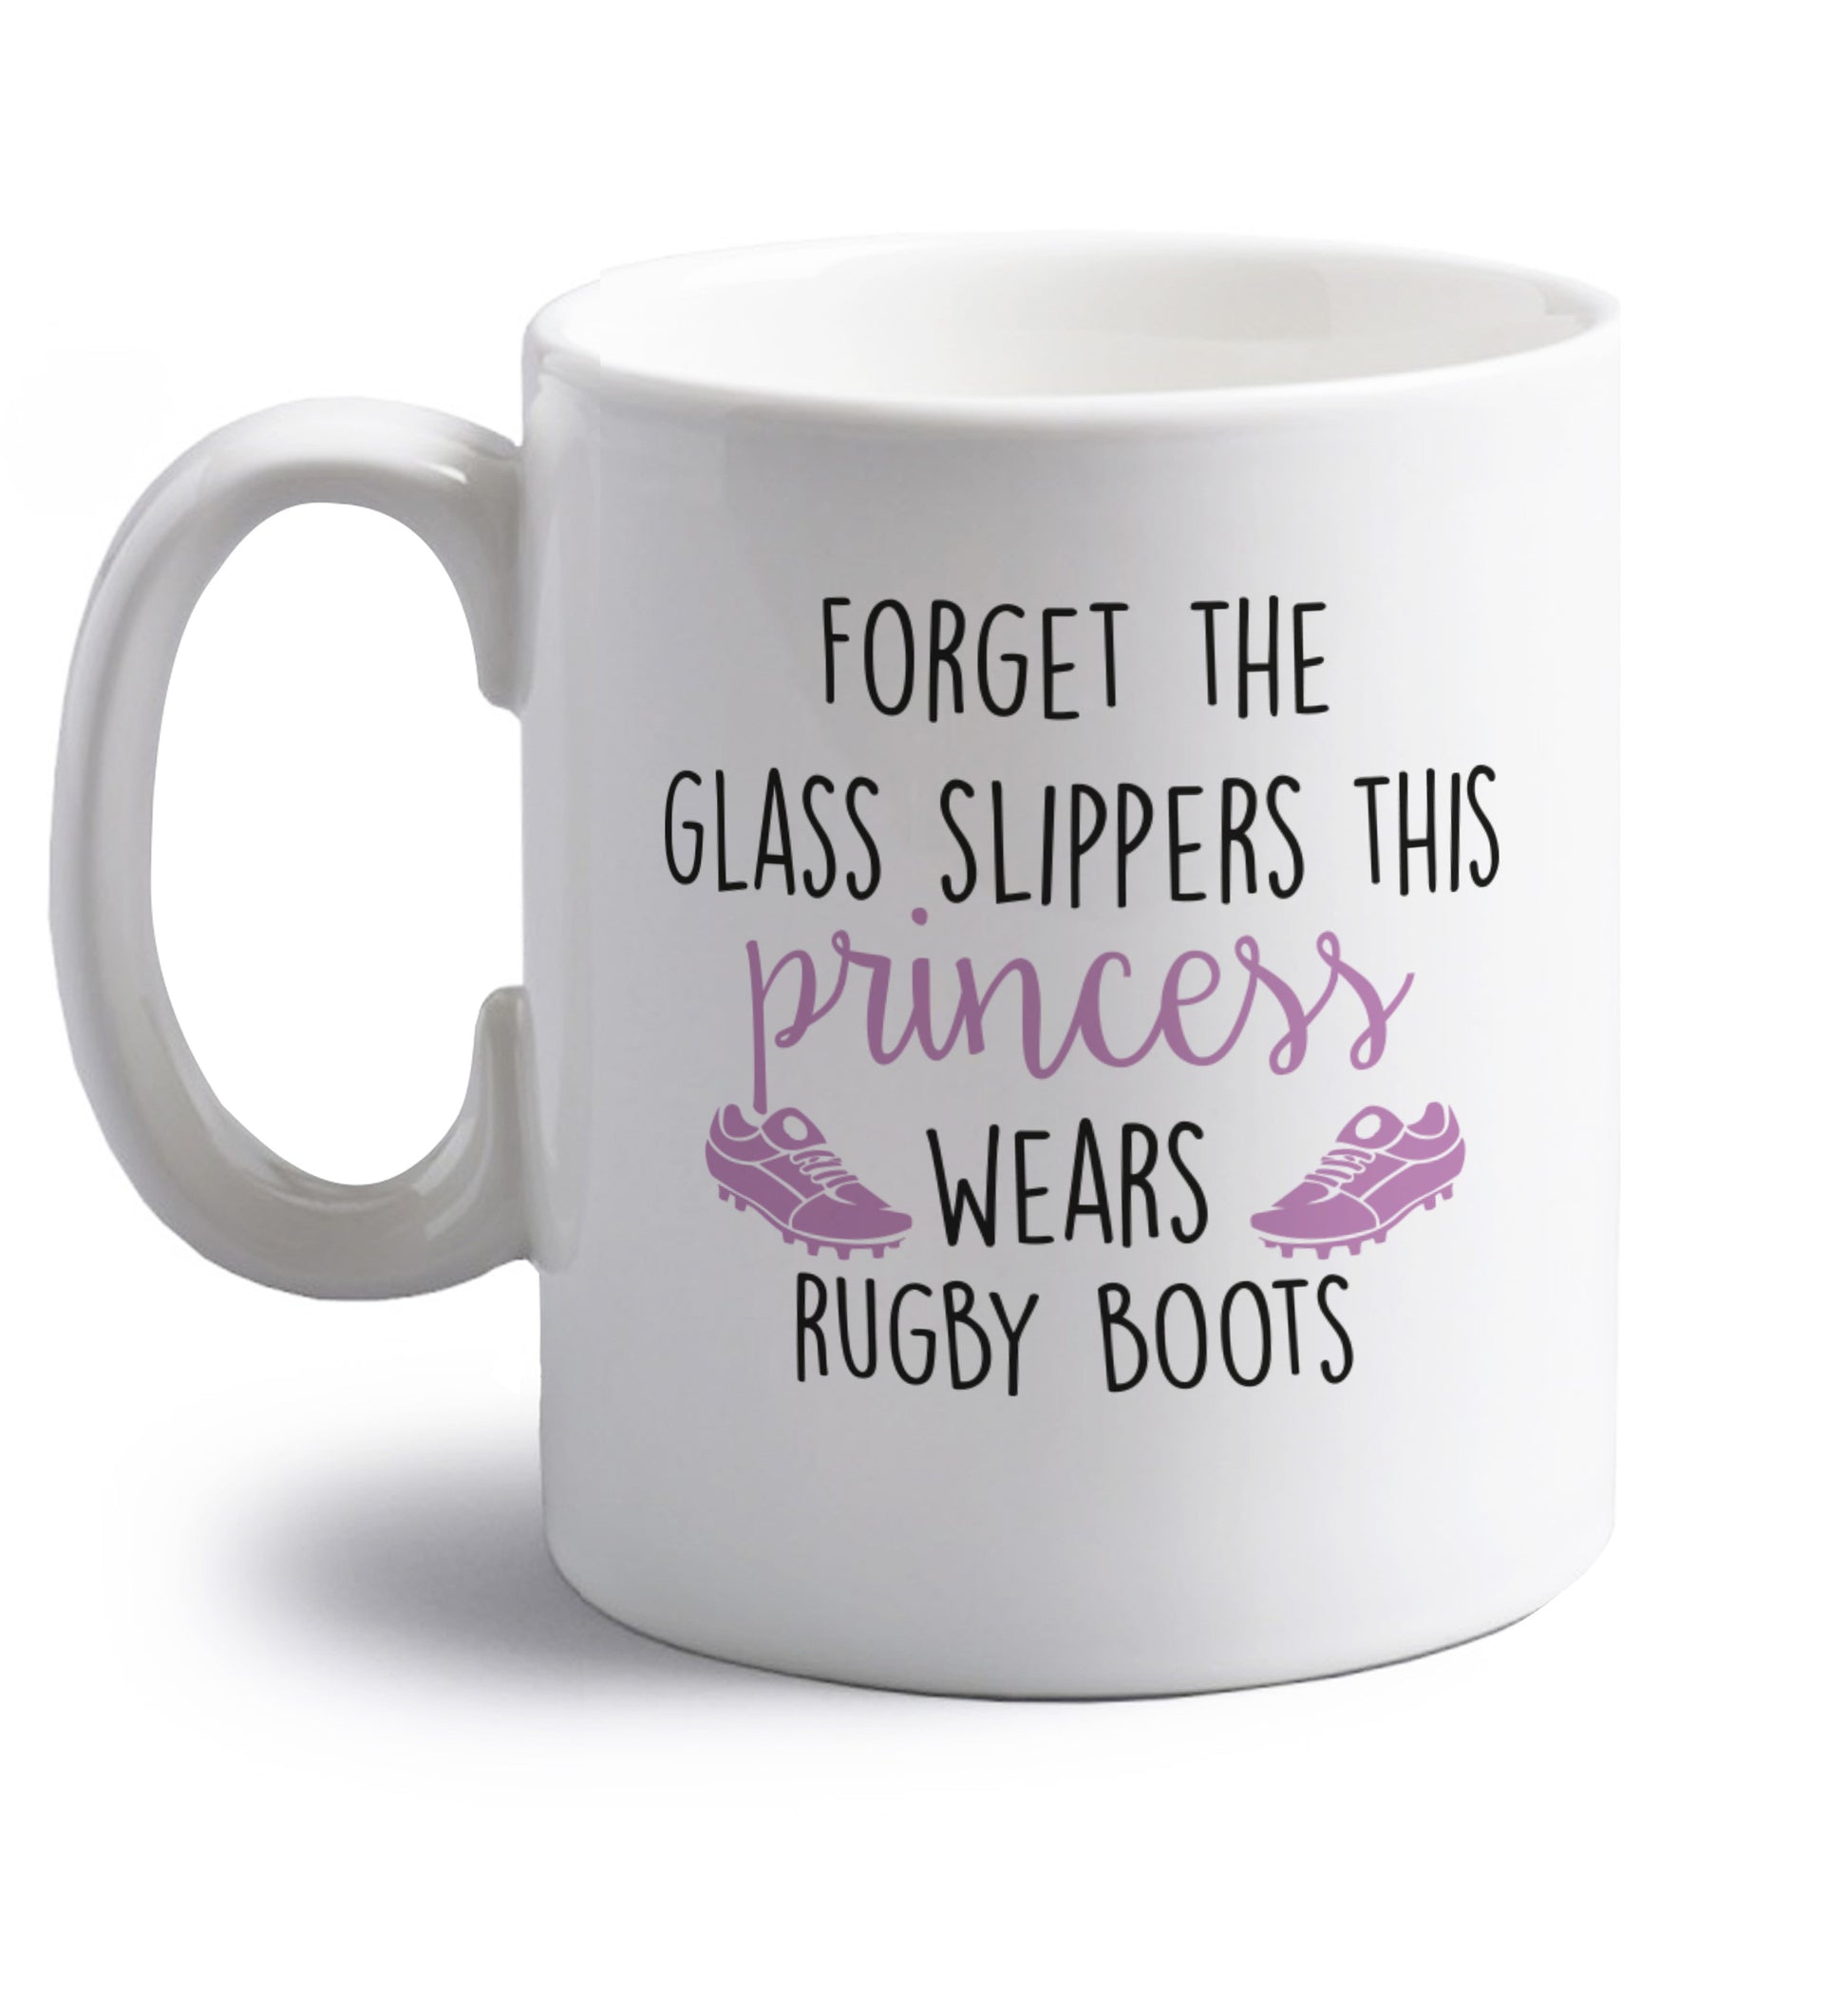 Forget the glass slippers this princess wears rugby boots right handed white ceramic mug 